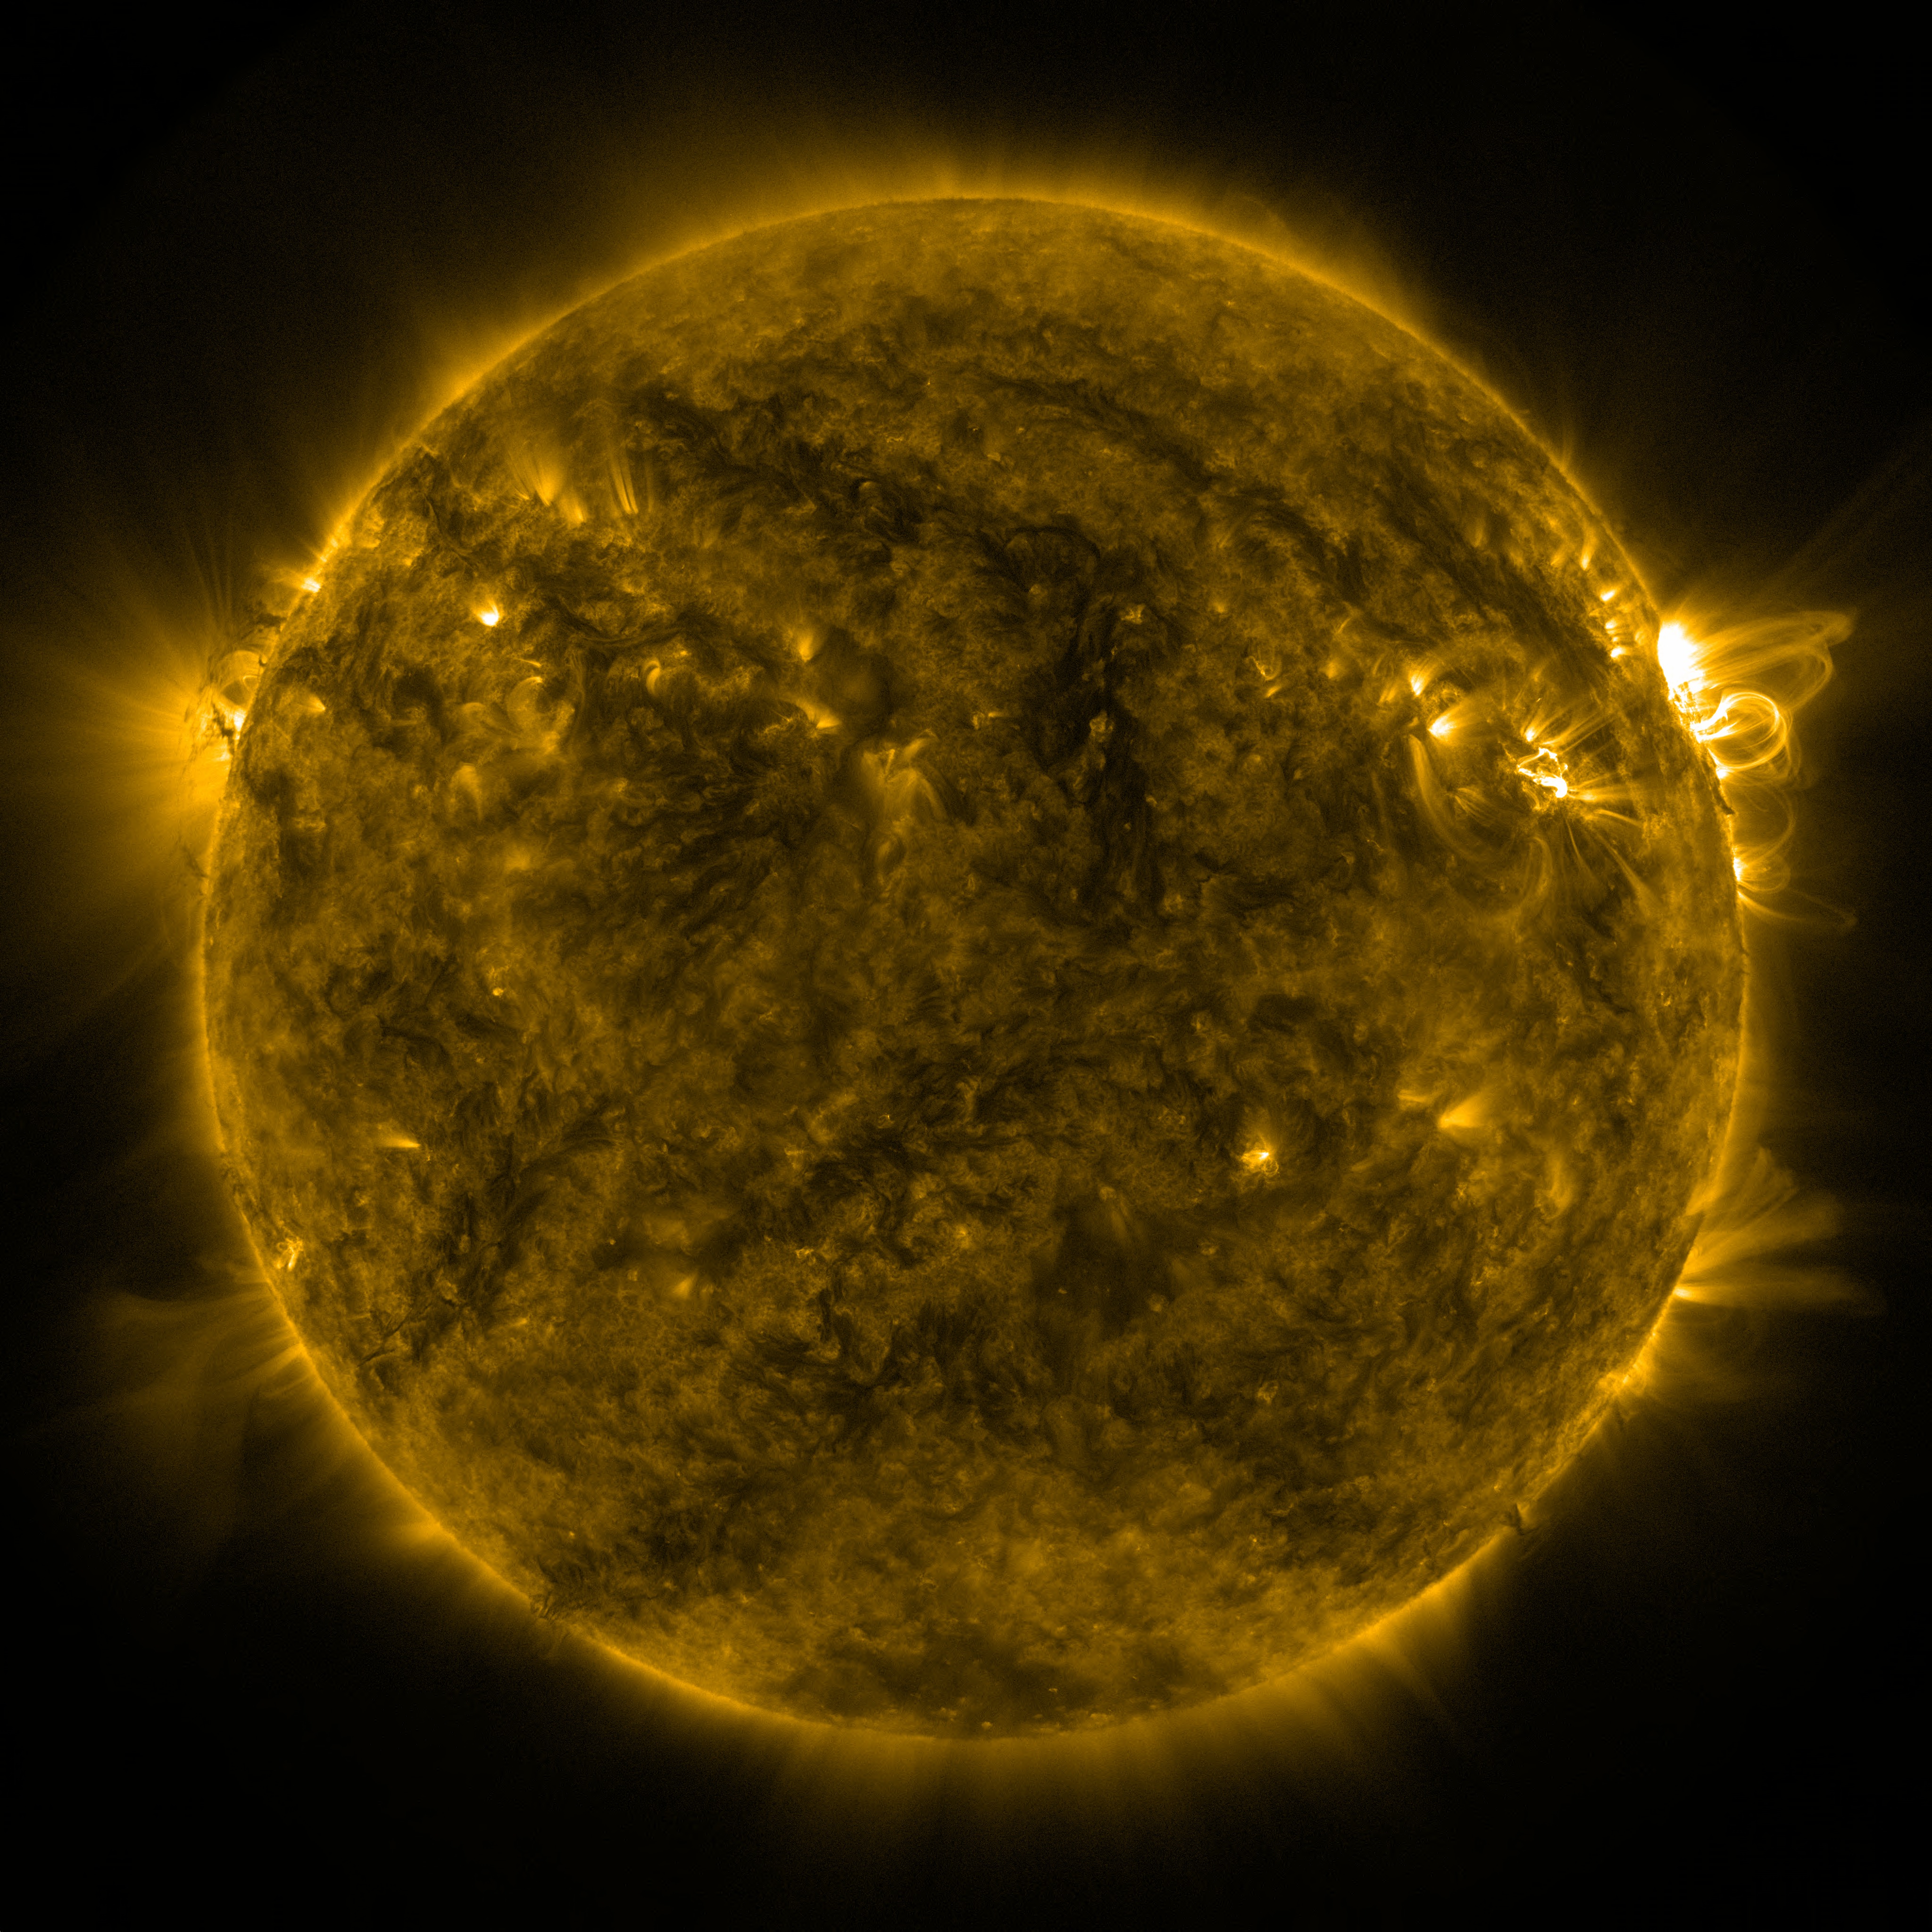 A movie of the tornado-like structure on the limb of the Sun.